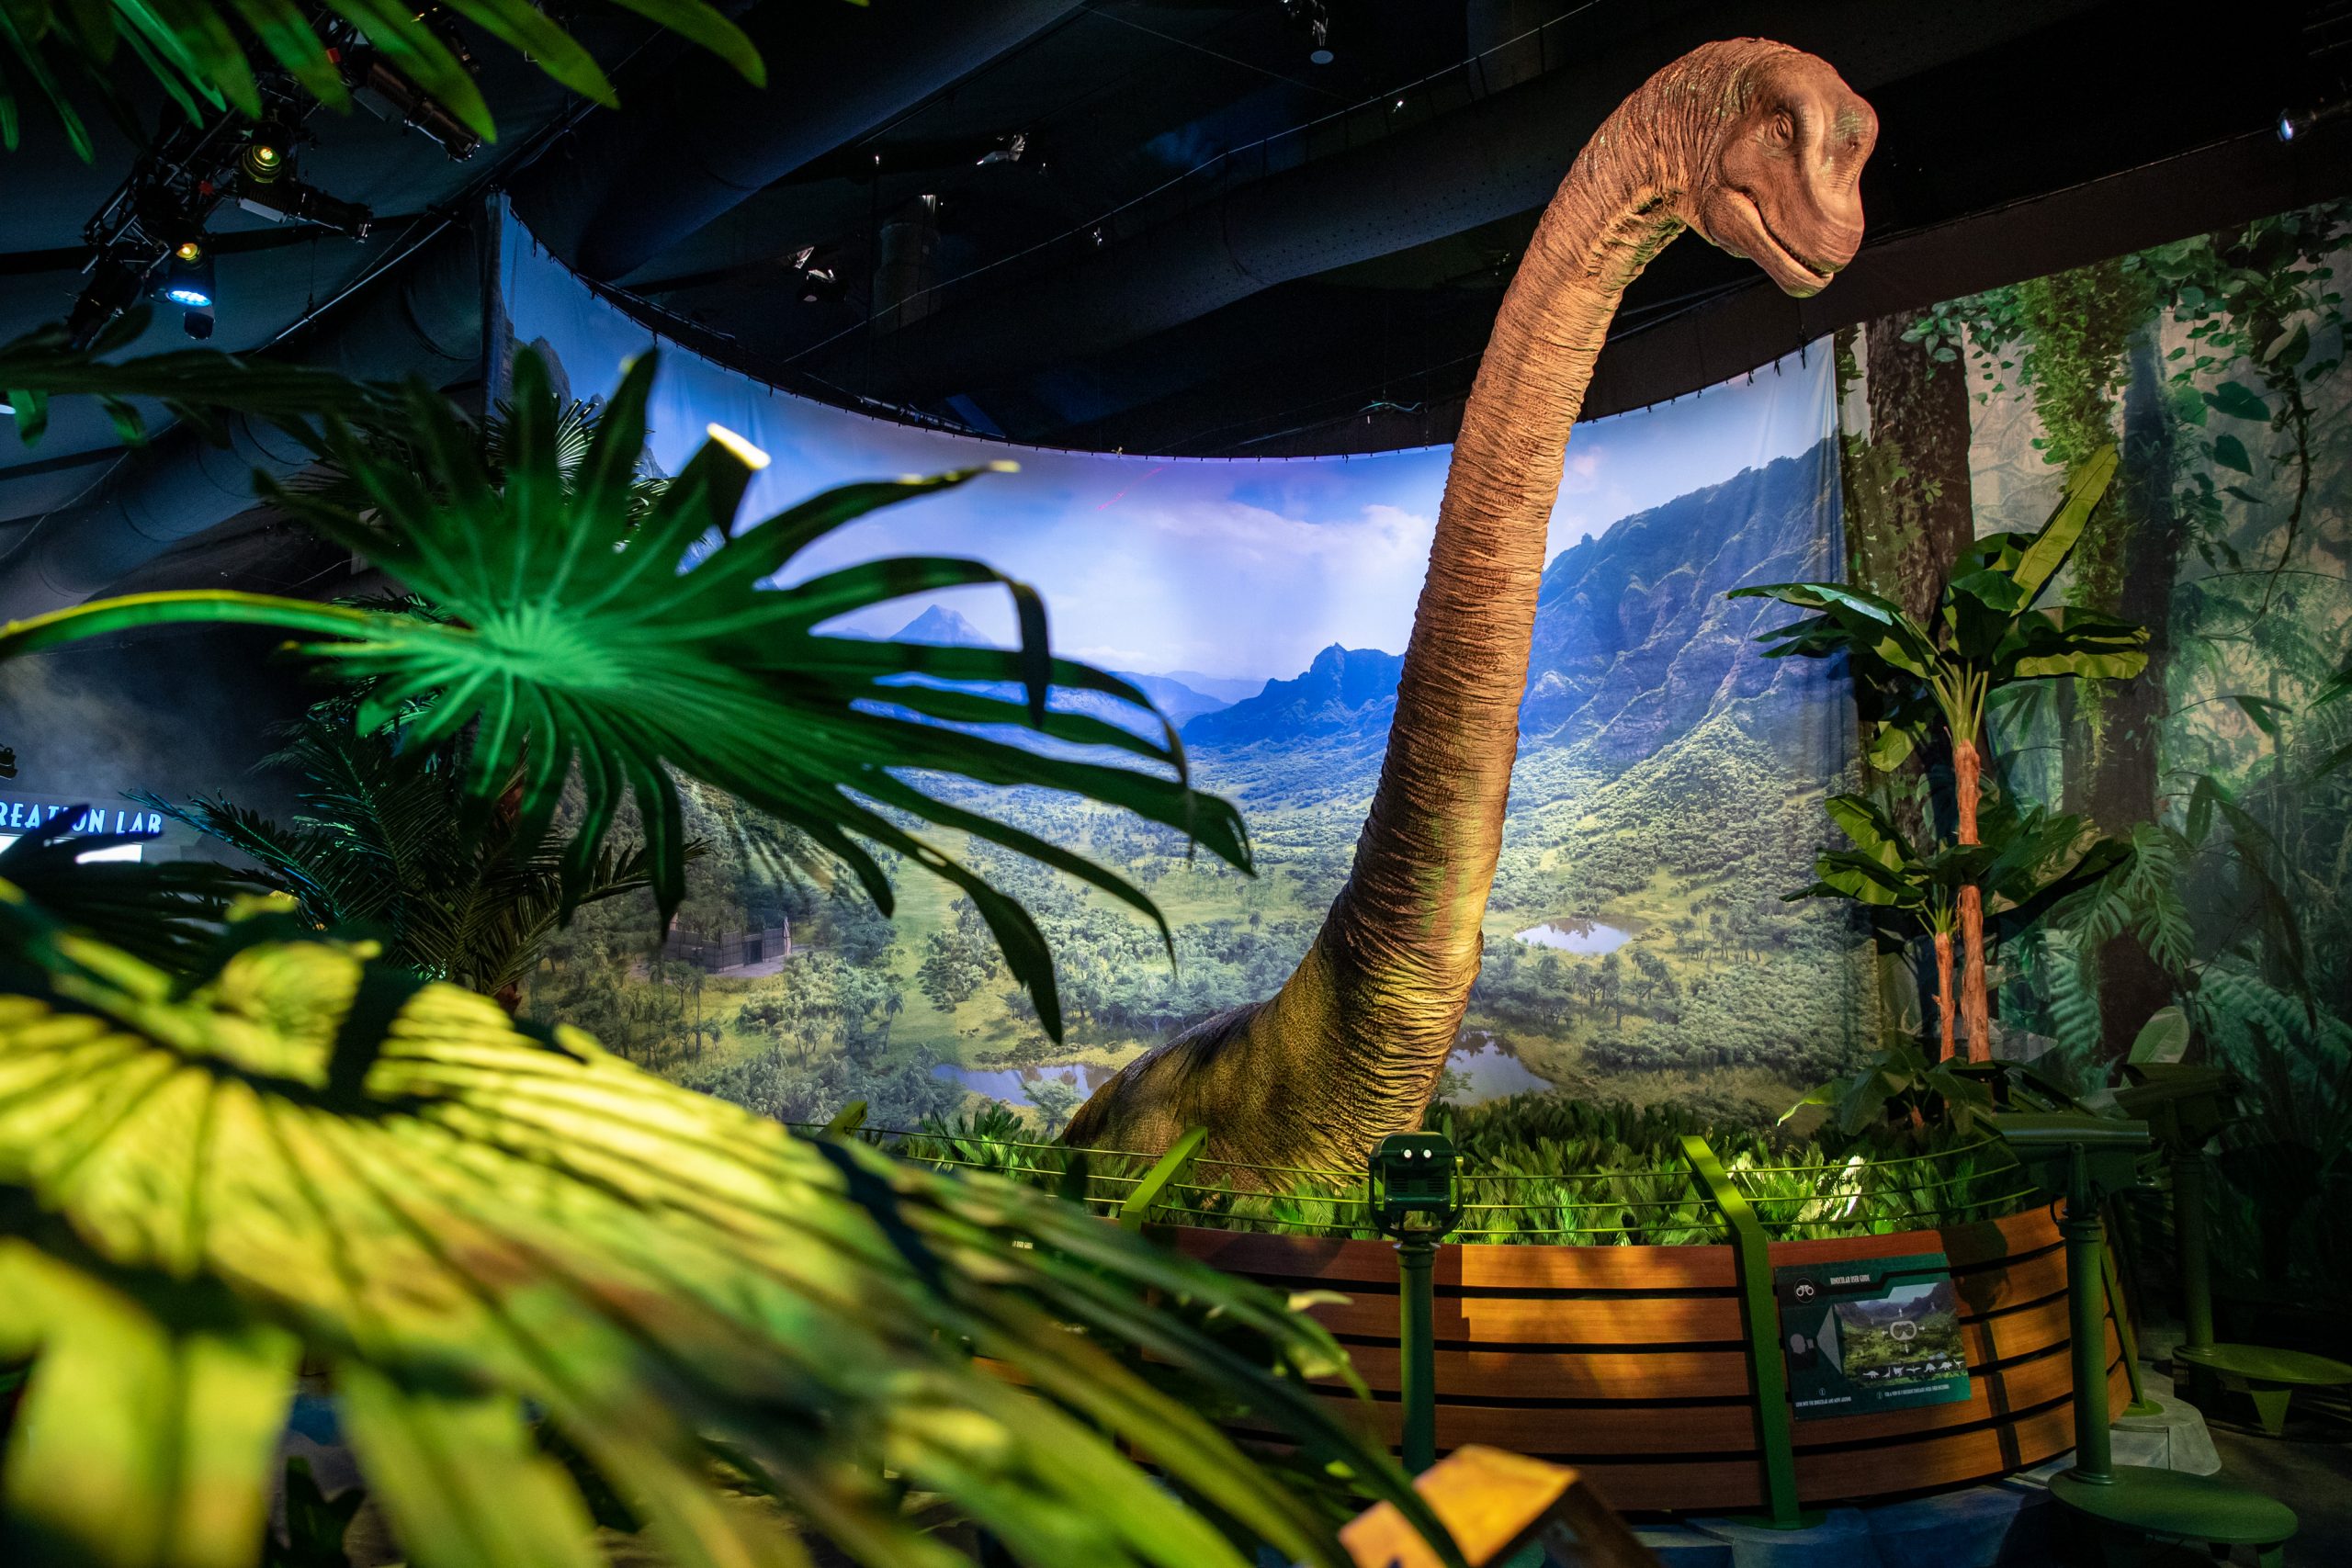 Jurassic World: The Exhibition 2024 - Noch bis August in Berlin (C)2023 Universal Studios and Amblin Entertainment Inc. All Rights Reserved